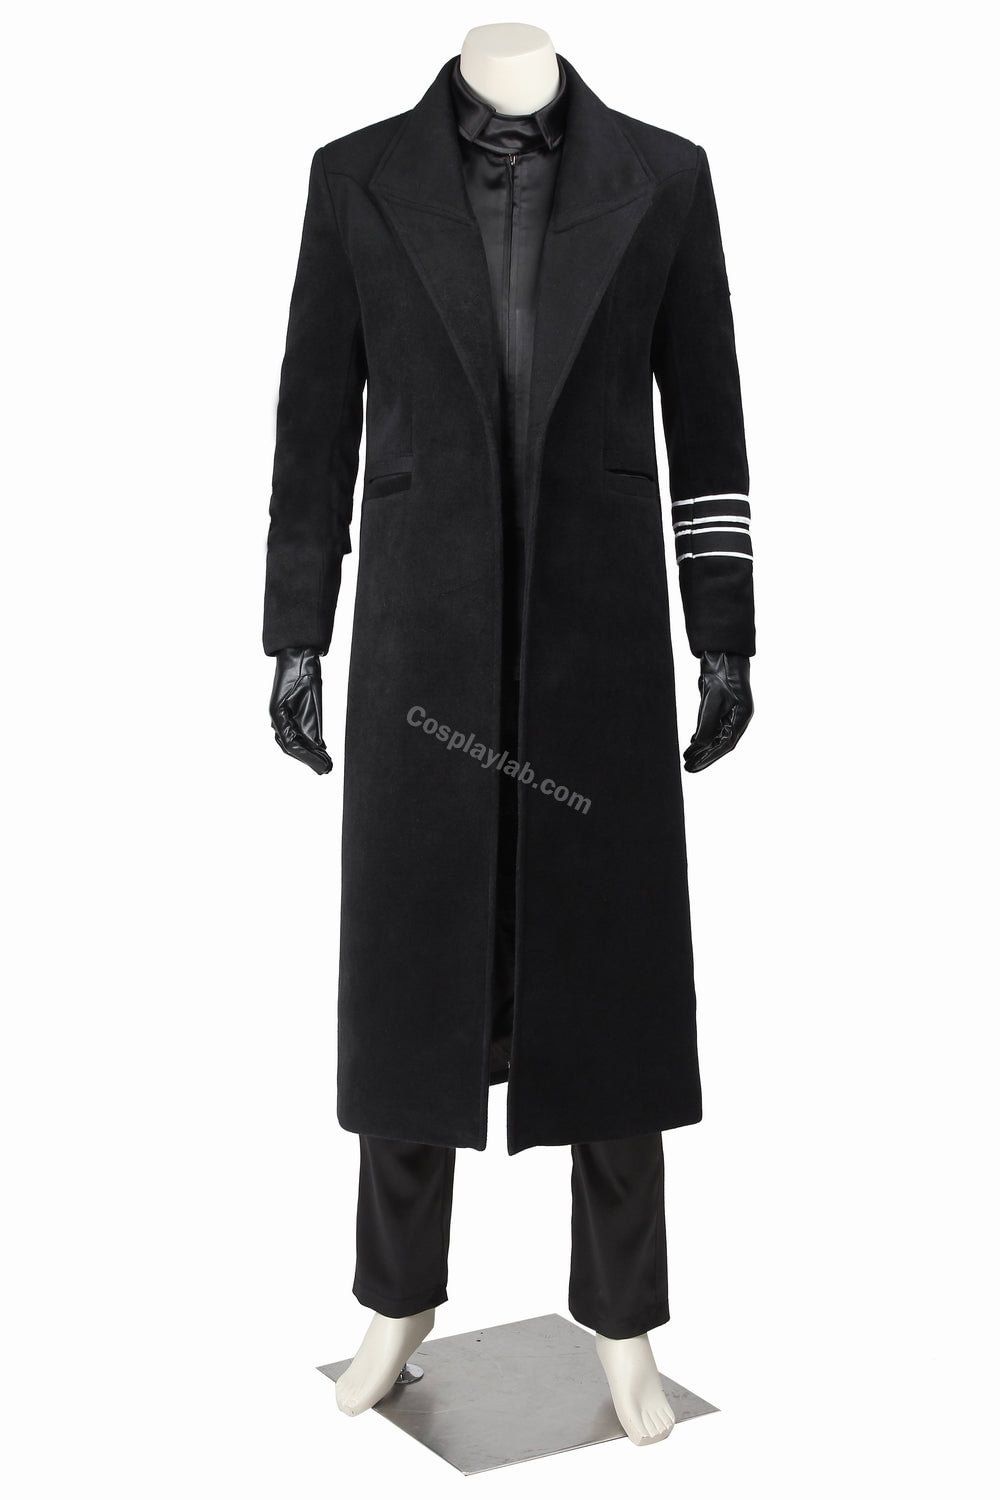 star wars armitage hux General Hux costume outfit suits